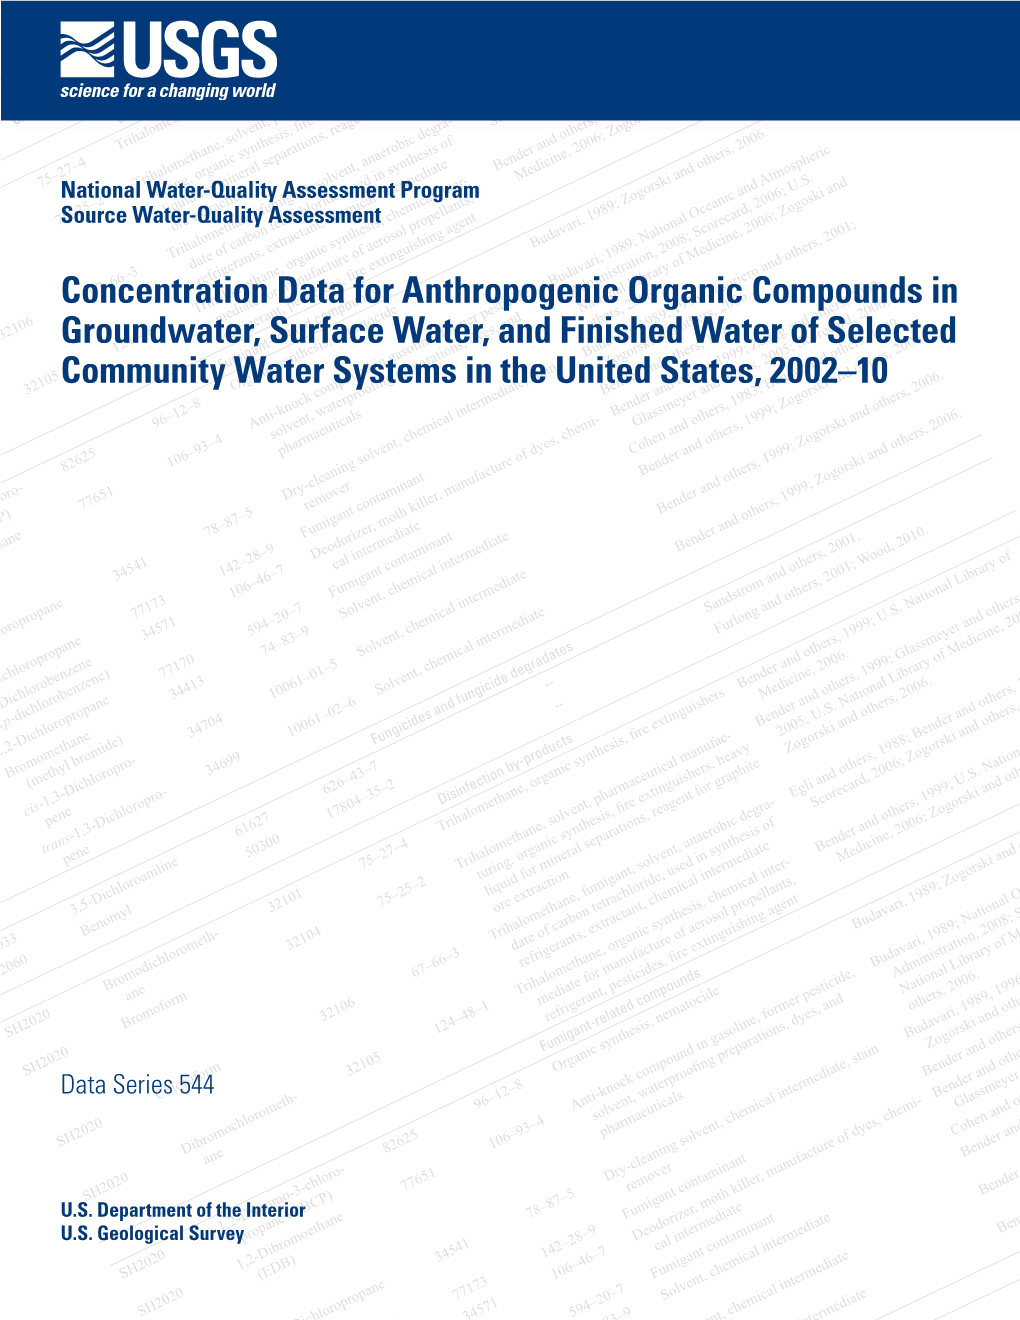 Concentration Data for Anthropogenic Organic Compounds in Groundwater, Surface Water, and Finished Water of Selected Community W